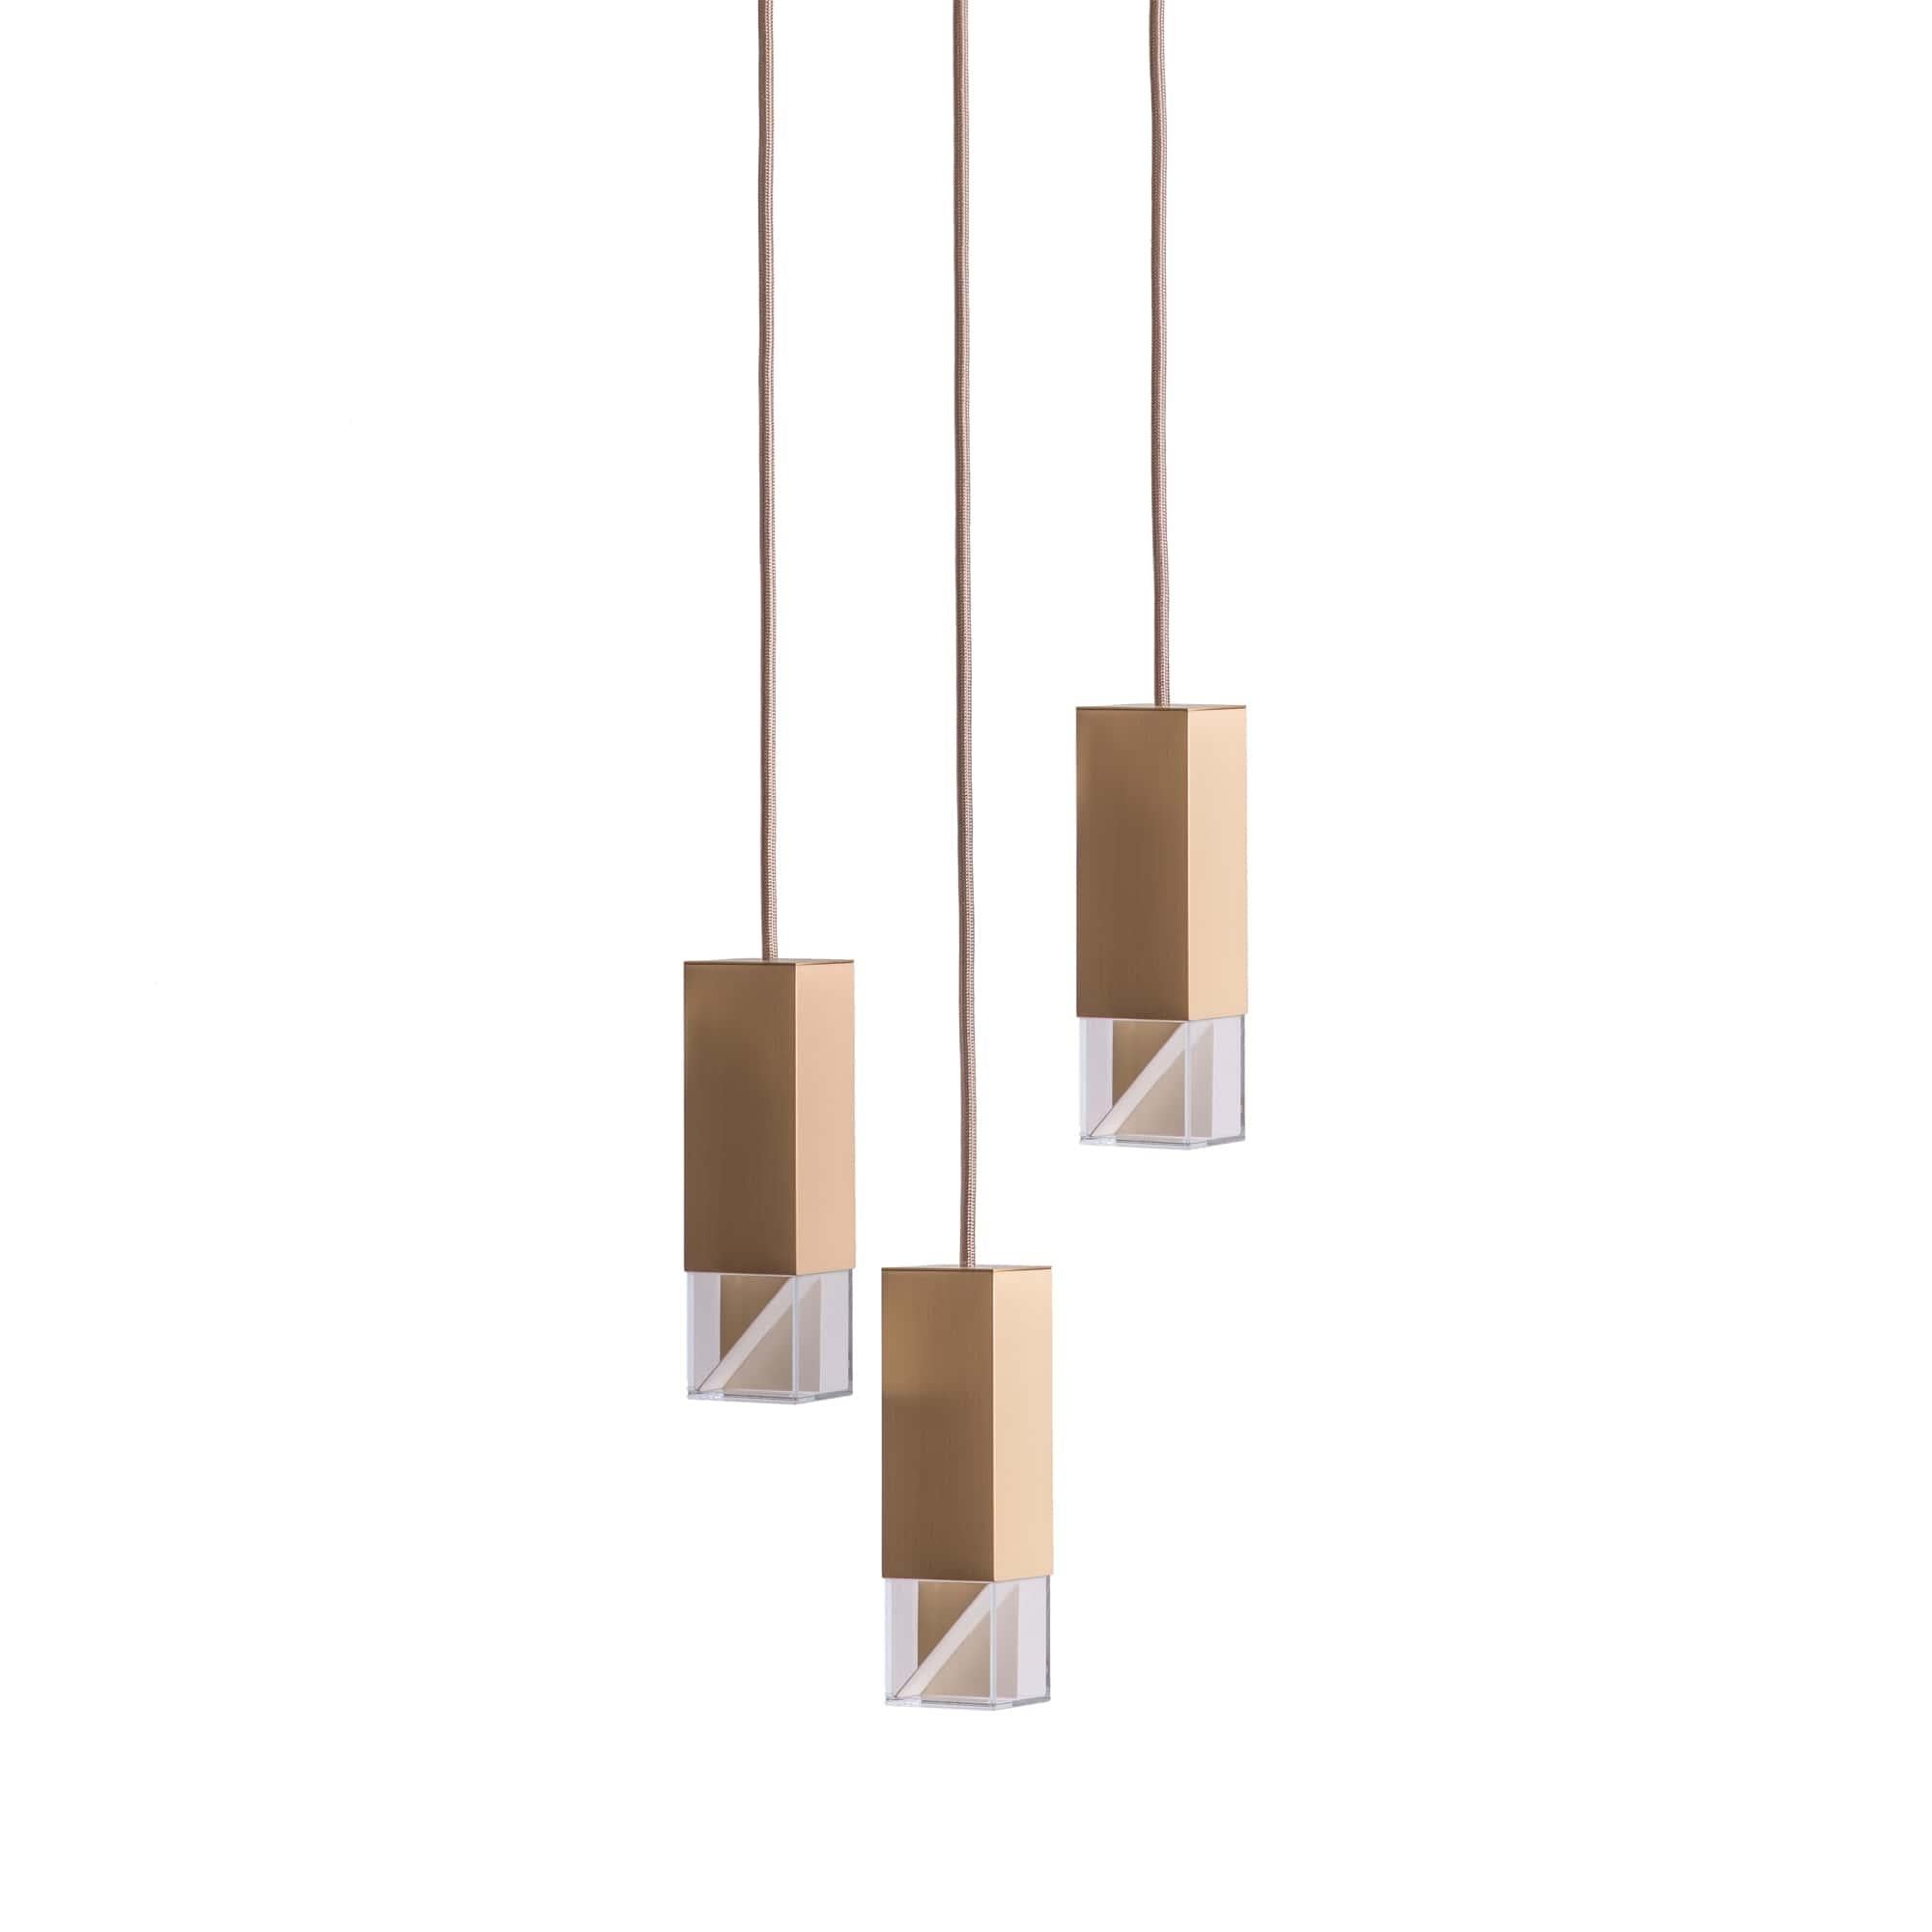 Lamp one trio chandelier in brass by Formaminima
Dimensions: 30 x 30 x H 68 cm
Materials: Lamp body in brass

Ultra- thin anti-reflection crystal diffuser
Inside- diffuser Limoges biscuit-finish porcelain sheets
Satin brass ceiling rose H 5 x